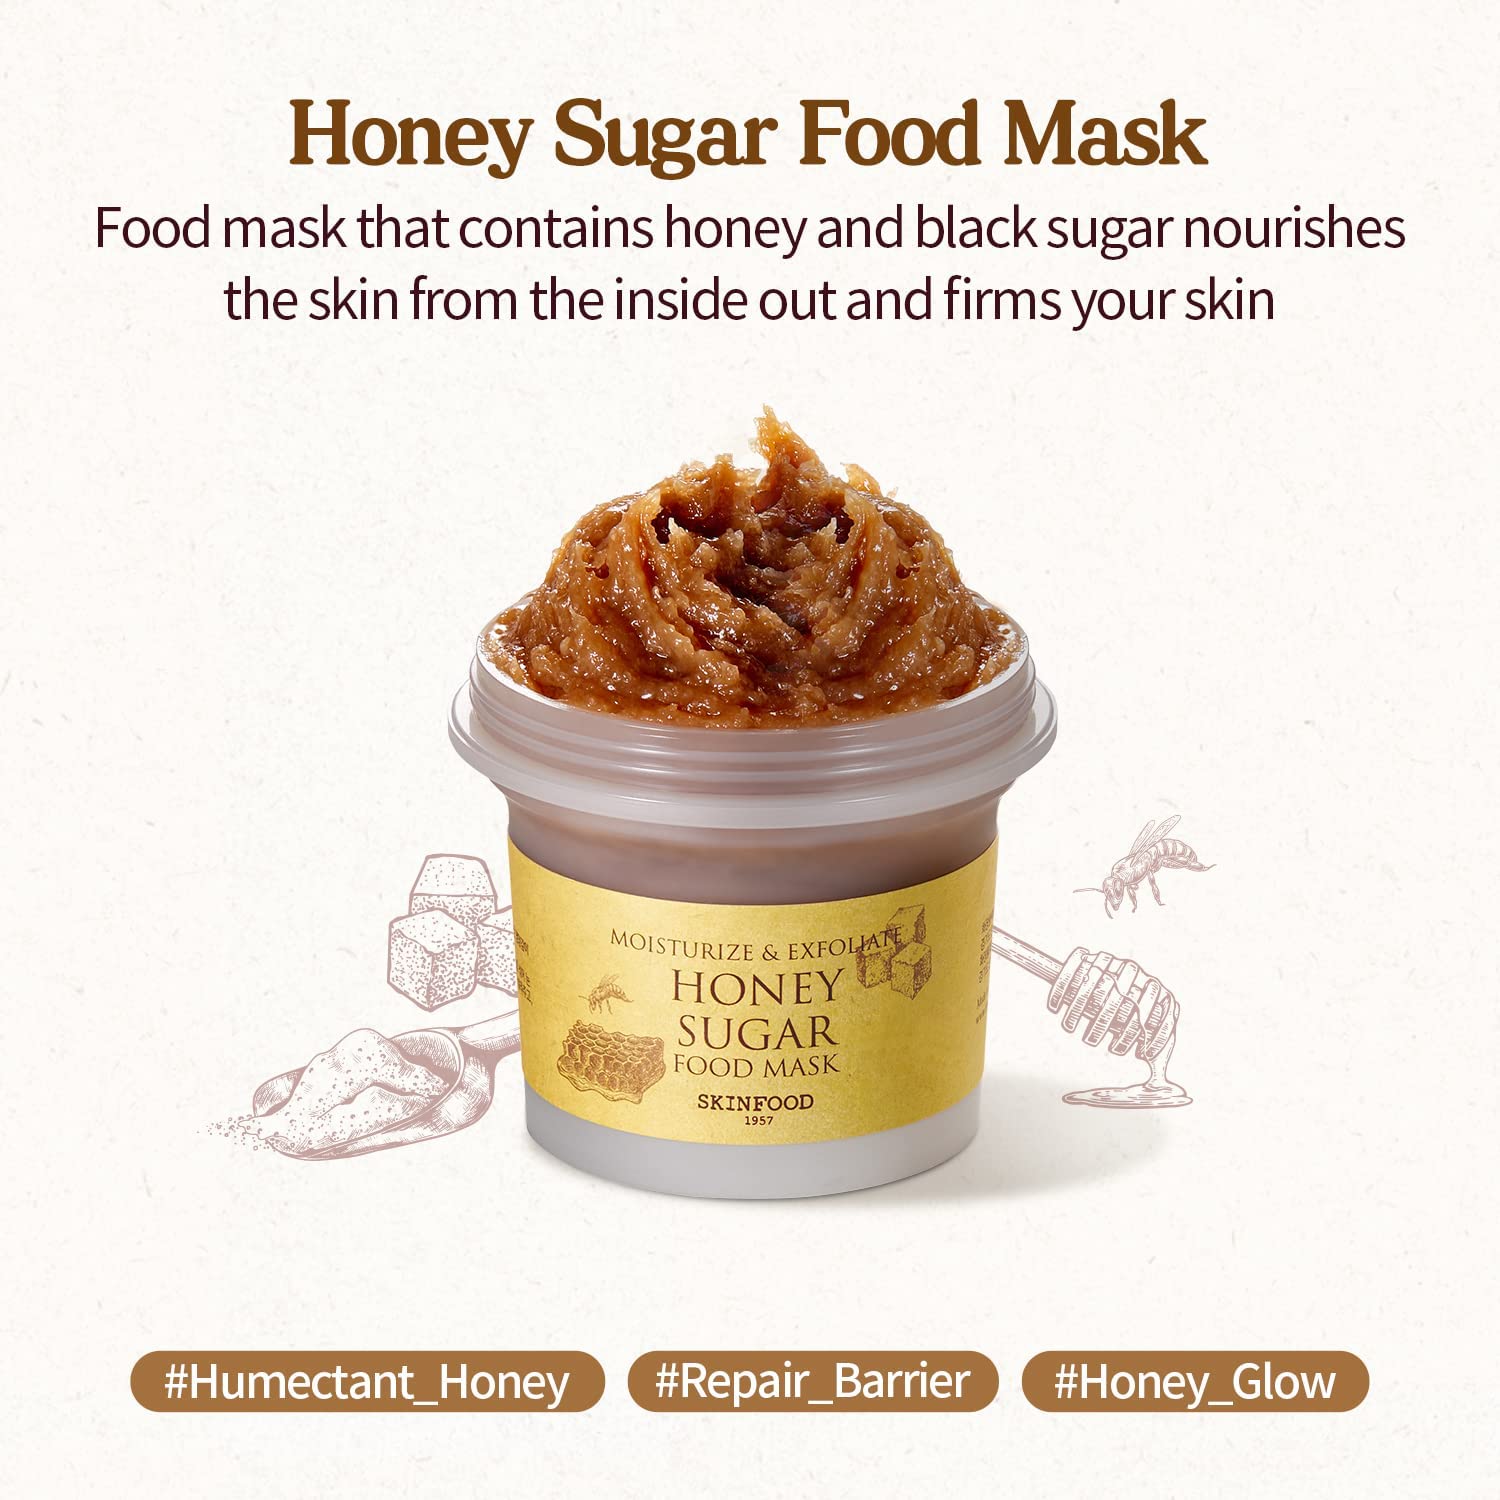 Honey Sugar Food Mask contains Manuka honey and black sugar that nourish and firms your skin from the inside out. 